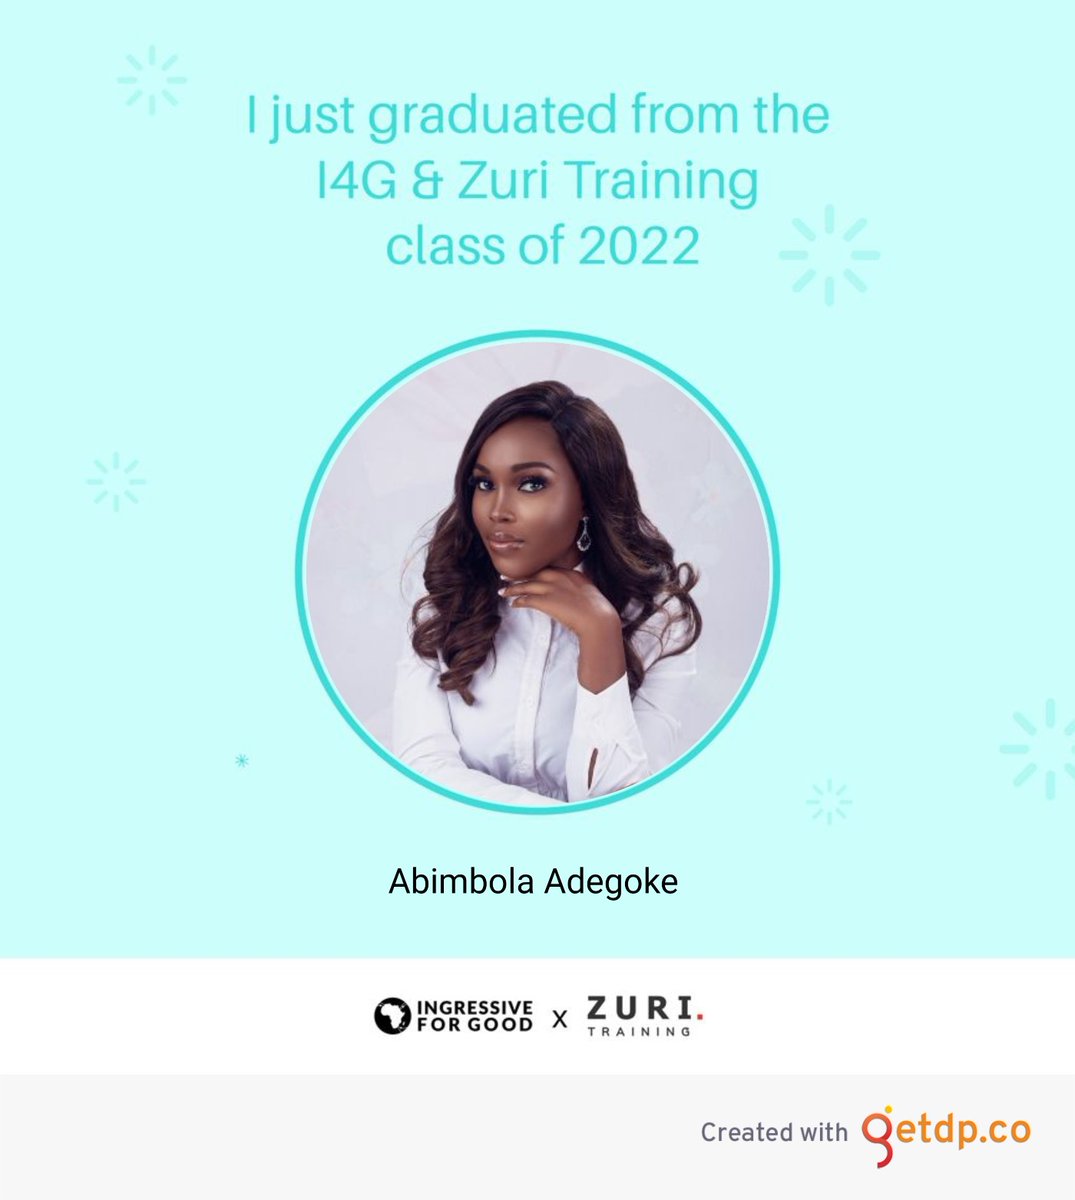 I did it again💃💃😁
I just graduated from the #I4GZuri Scholarship with @ingressive4good and @thezuriteam
I will definitely be great in the Tech space.
#14G #ZuriComrades #Ingressiveforgood #productdesign